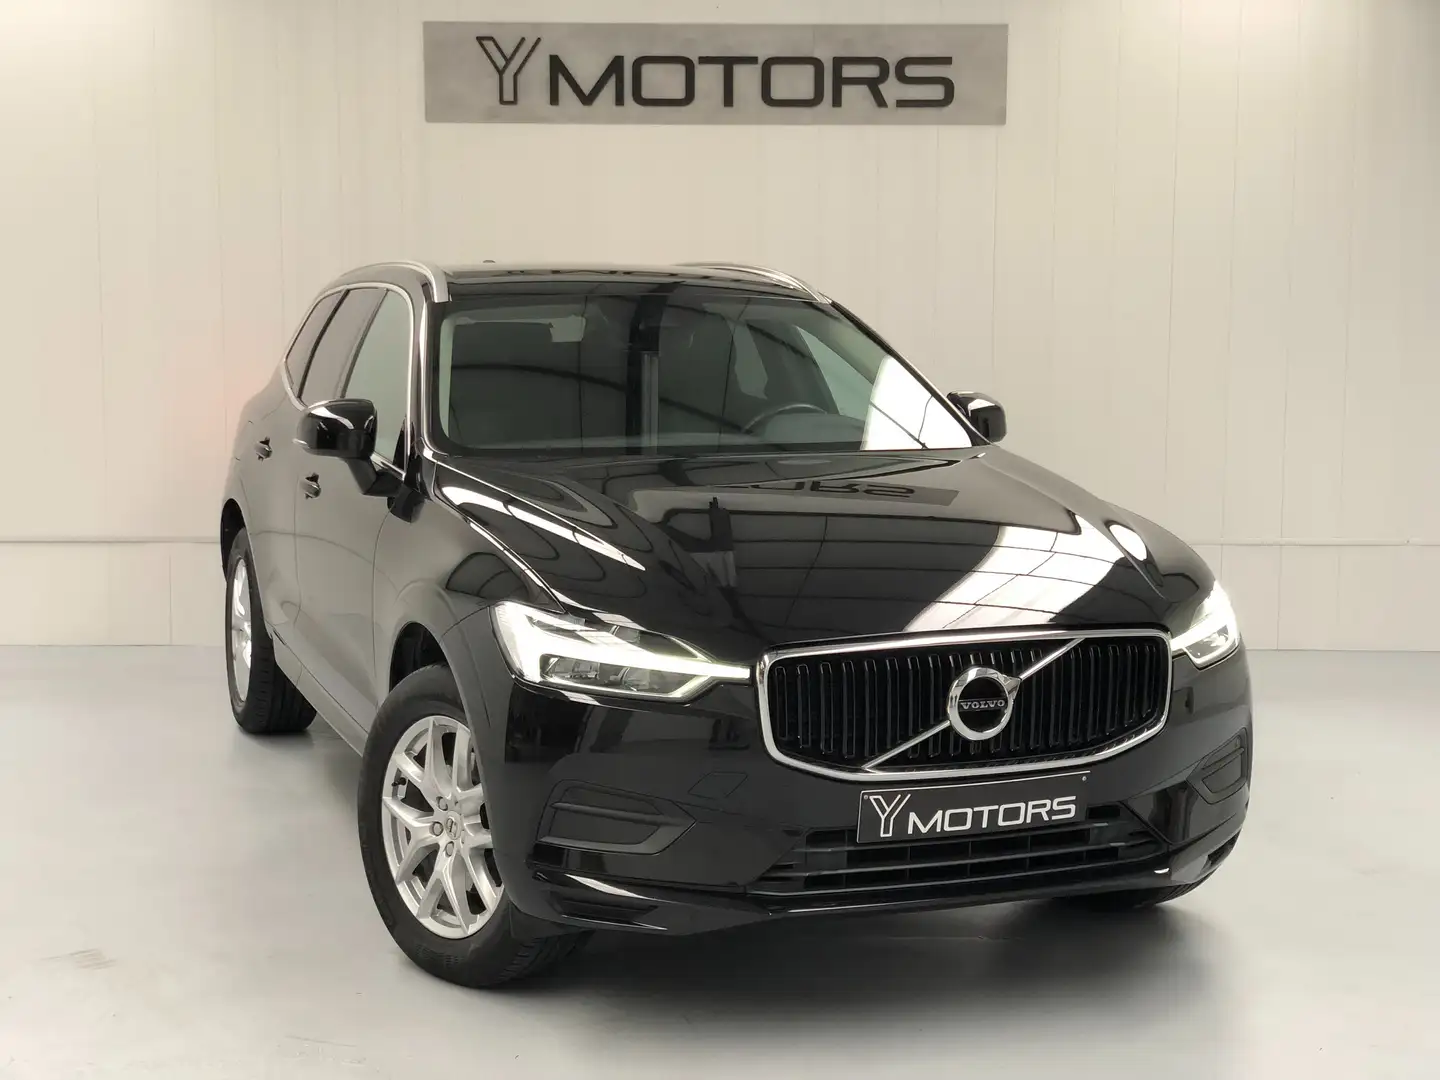 Volvo XC60 2.0 D4 GEARTRONIC MOMENTUM 163 CH FULL LED ACC Noir - 1